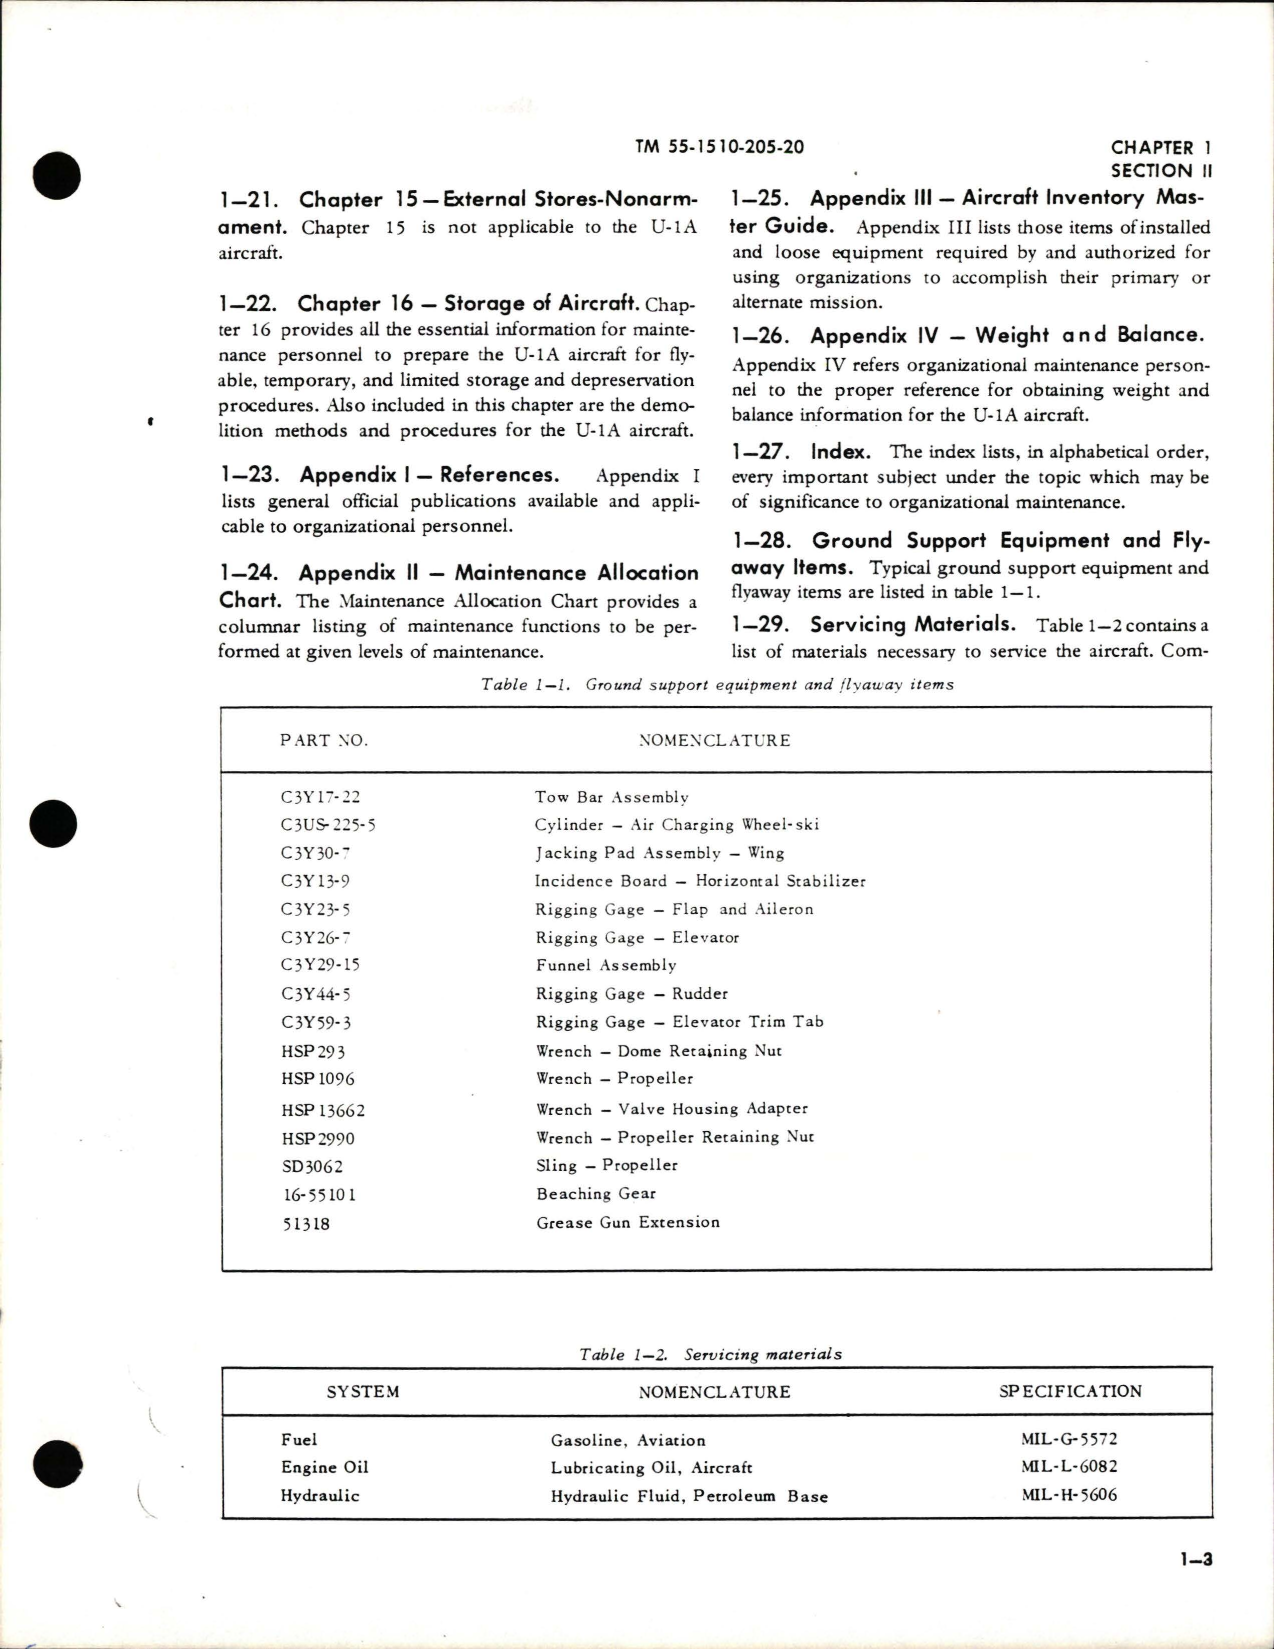 Sample page 7 from AirCorps Library document: Organizational Maintenance Manual for U-1A Otter